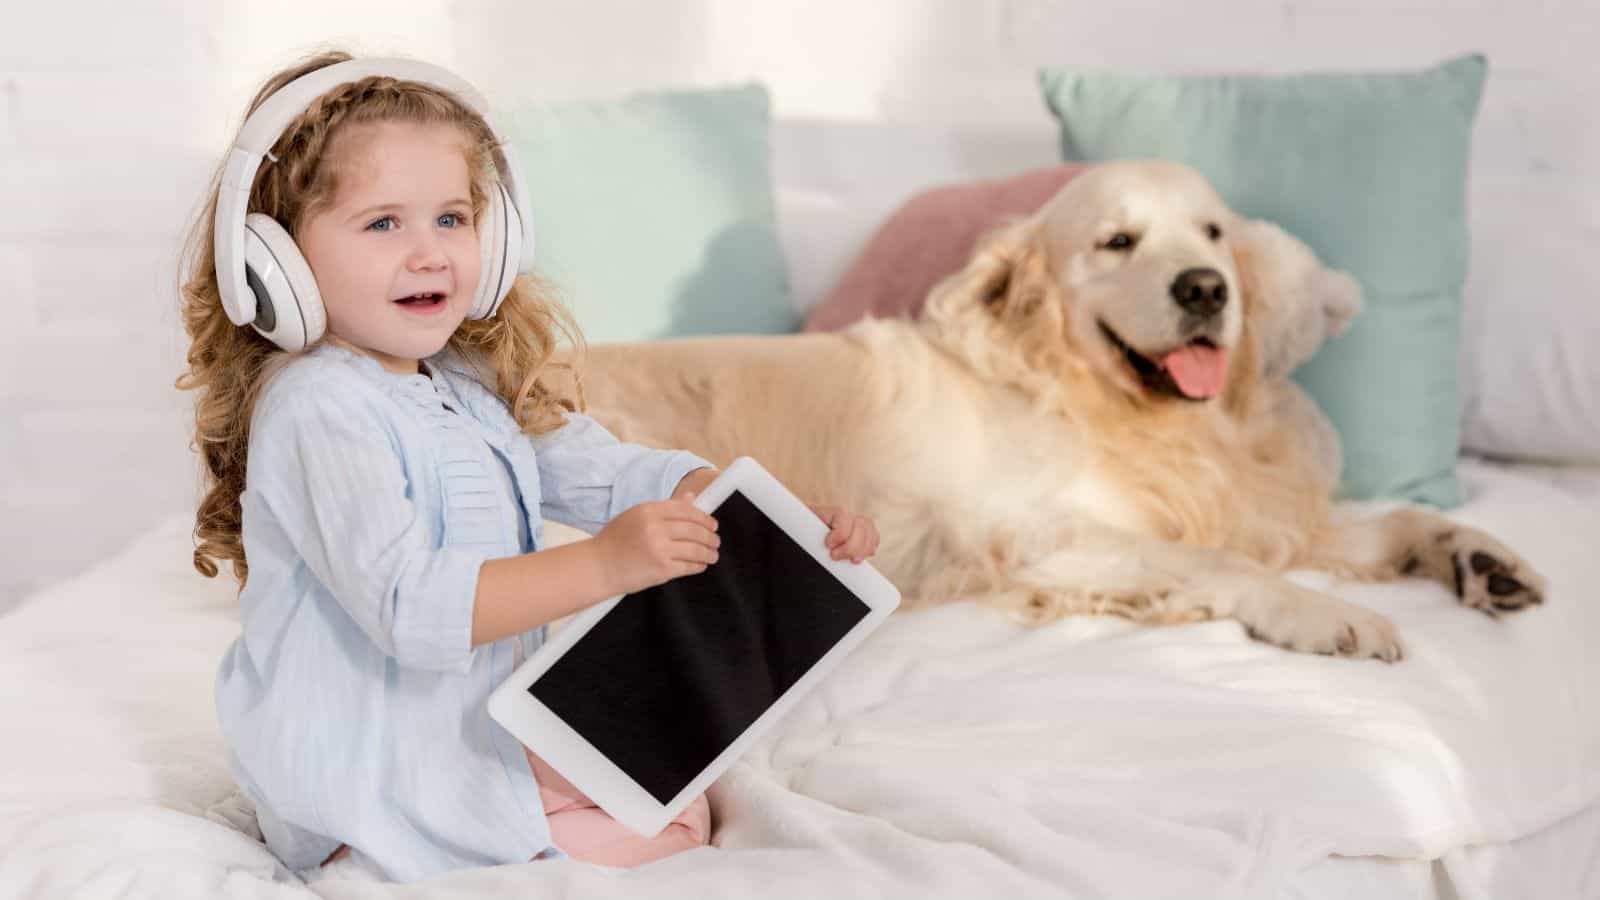 toddler baby on couch with earphones and tablet and dog